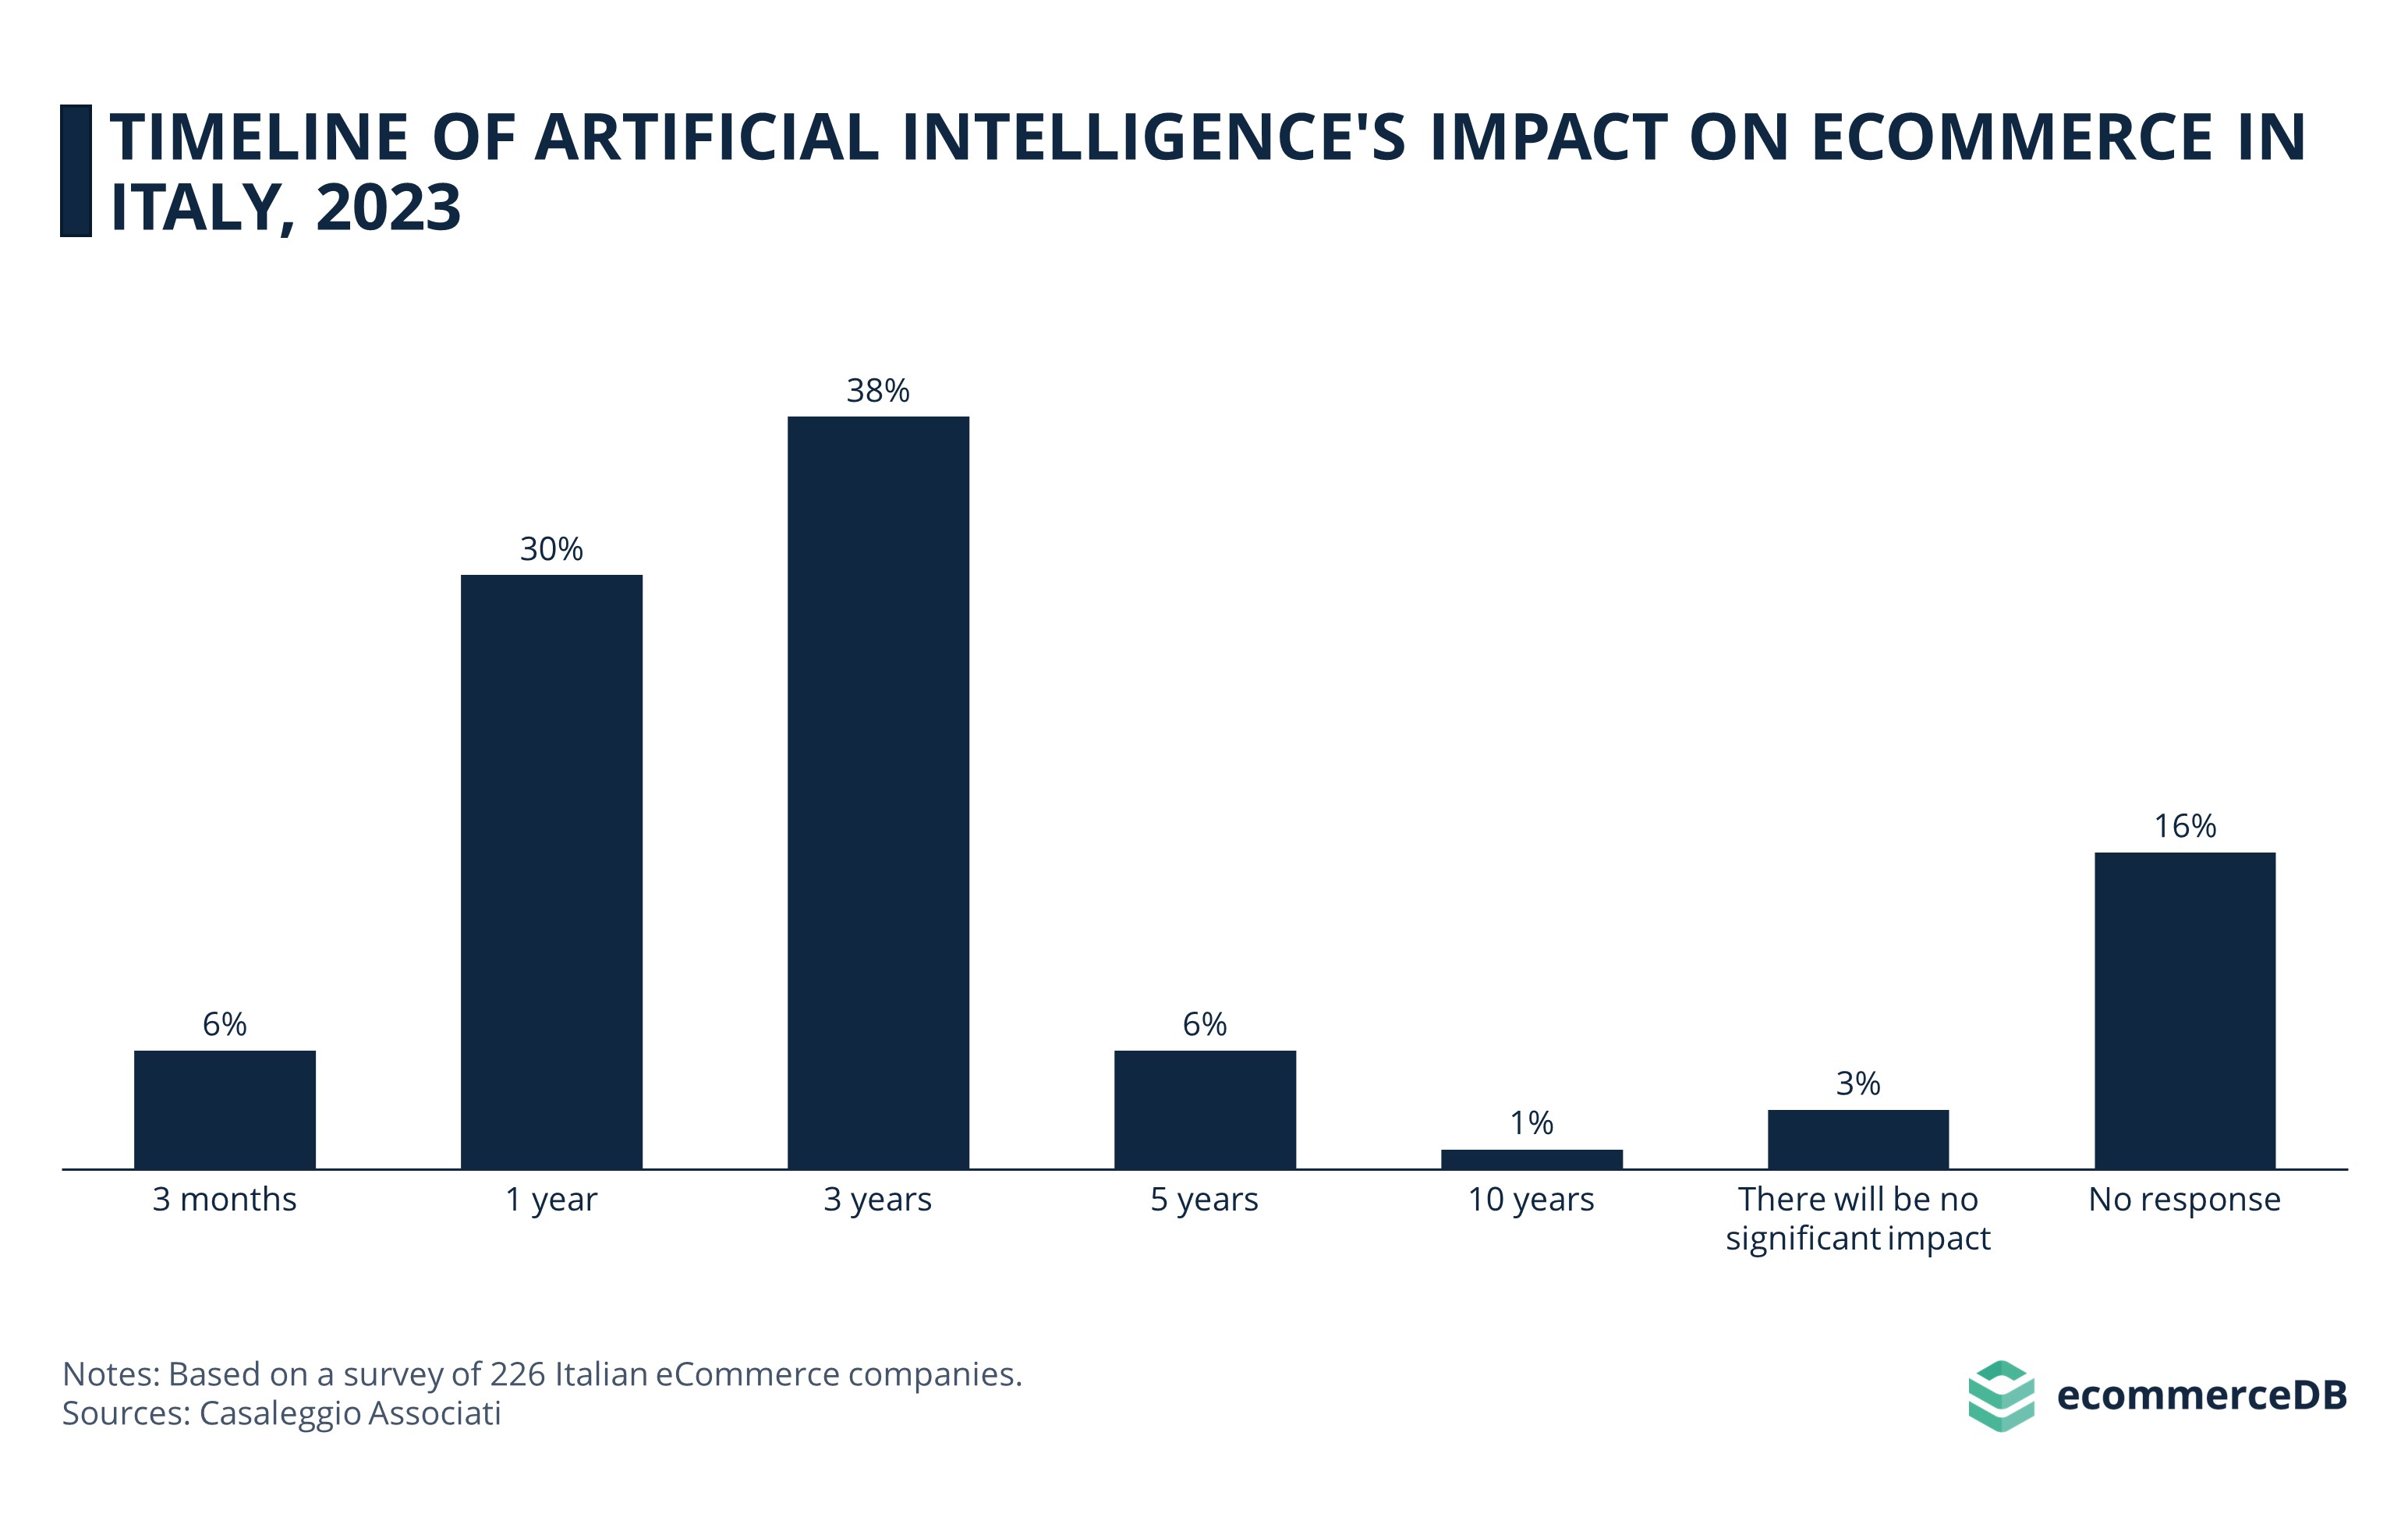 Timeline of Artificial Intelligence Impact on eCommerce in Italy, 2023